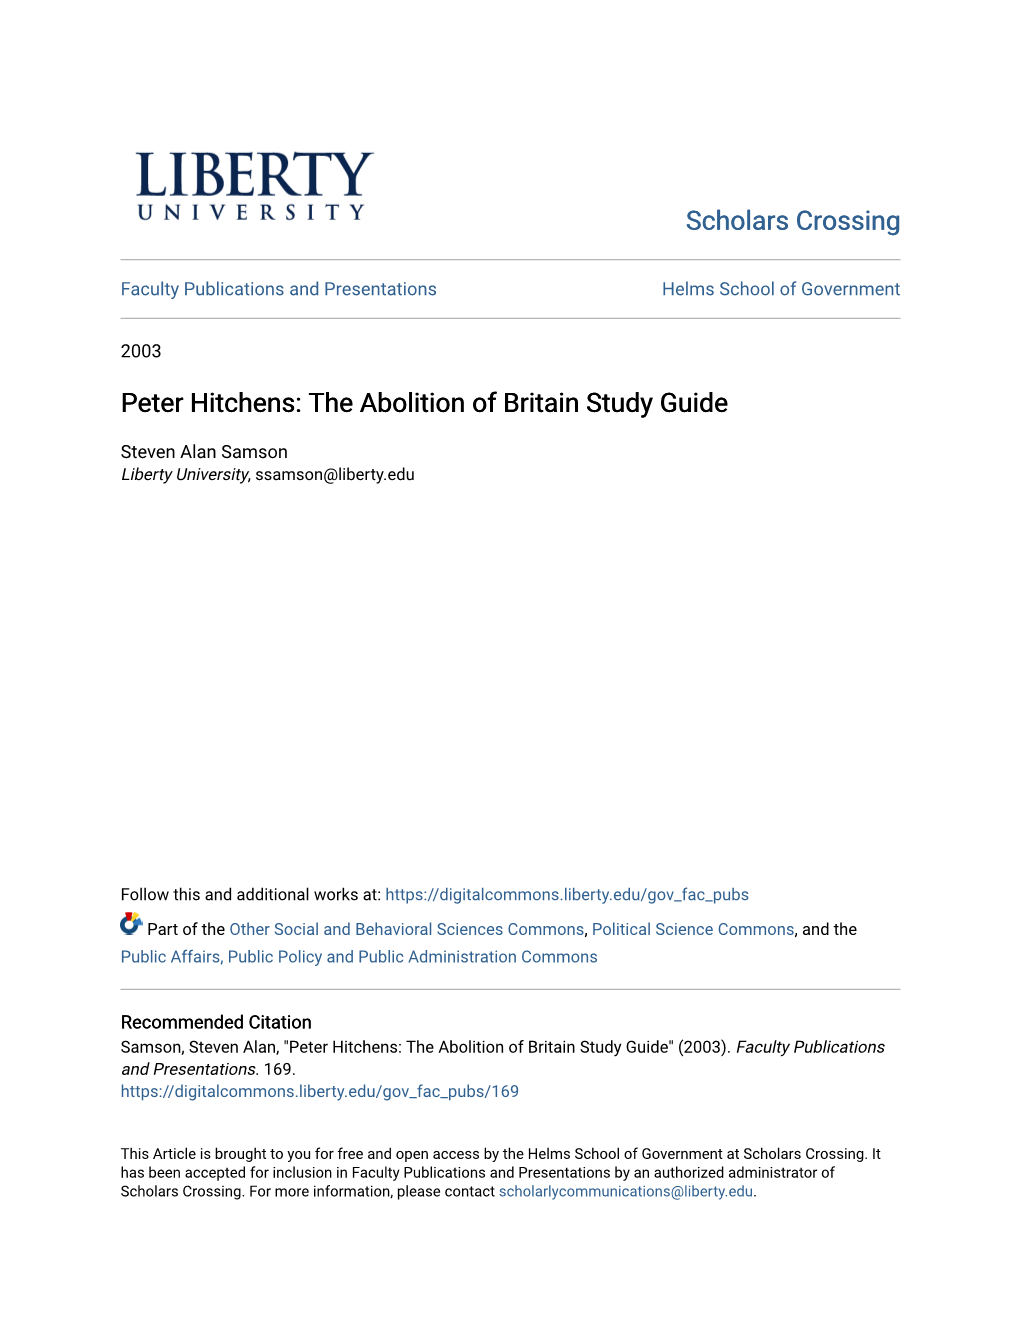 Peter Hitchens: the Abolition of Britain Study Guide